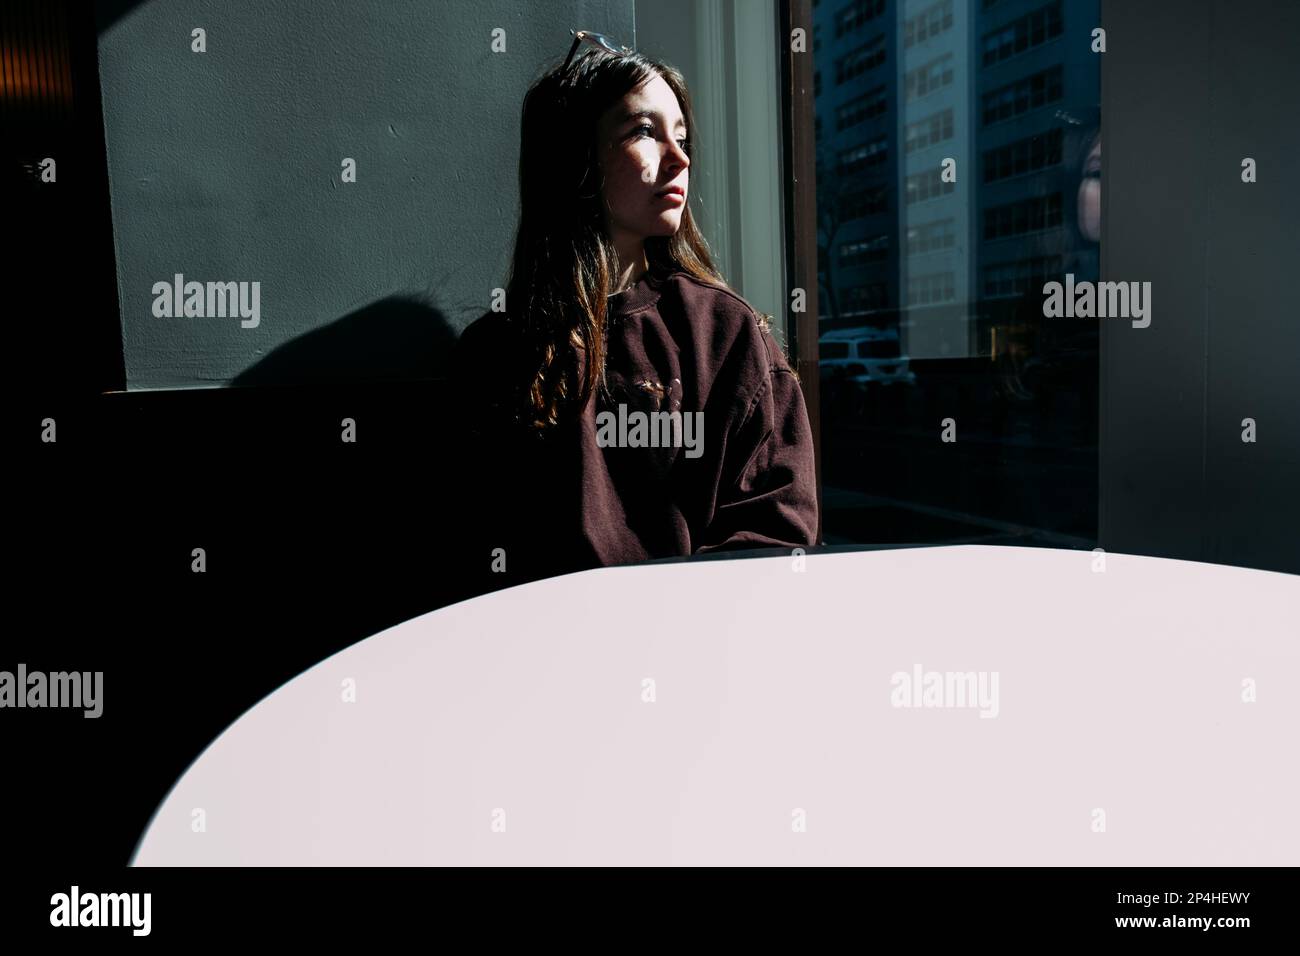 Teen girl looking out window on sunny day Stock Photo